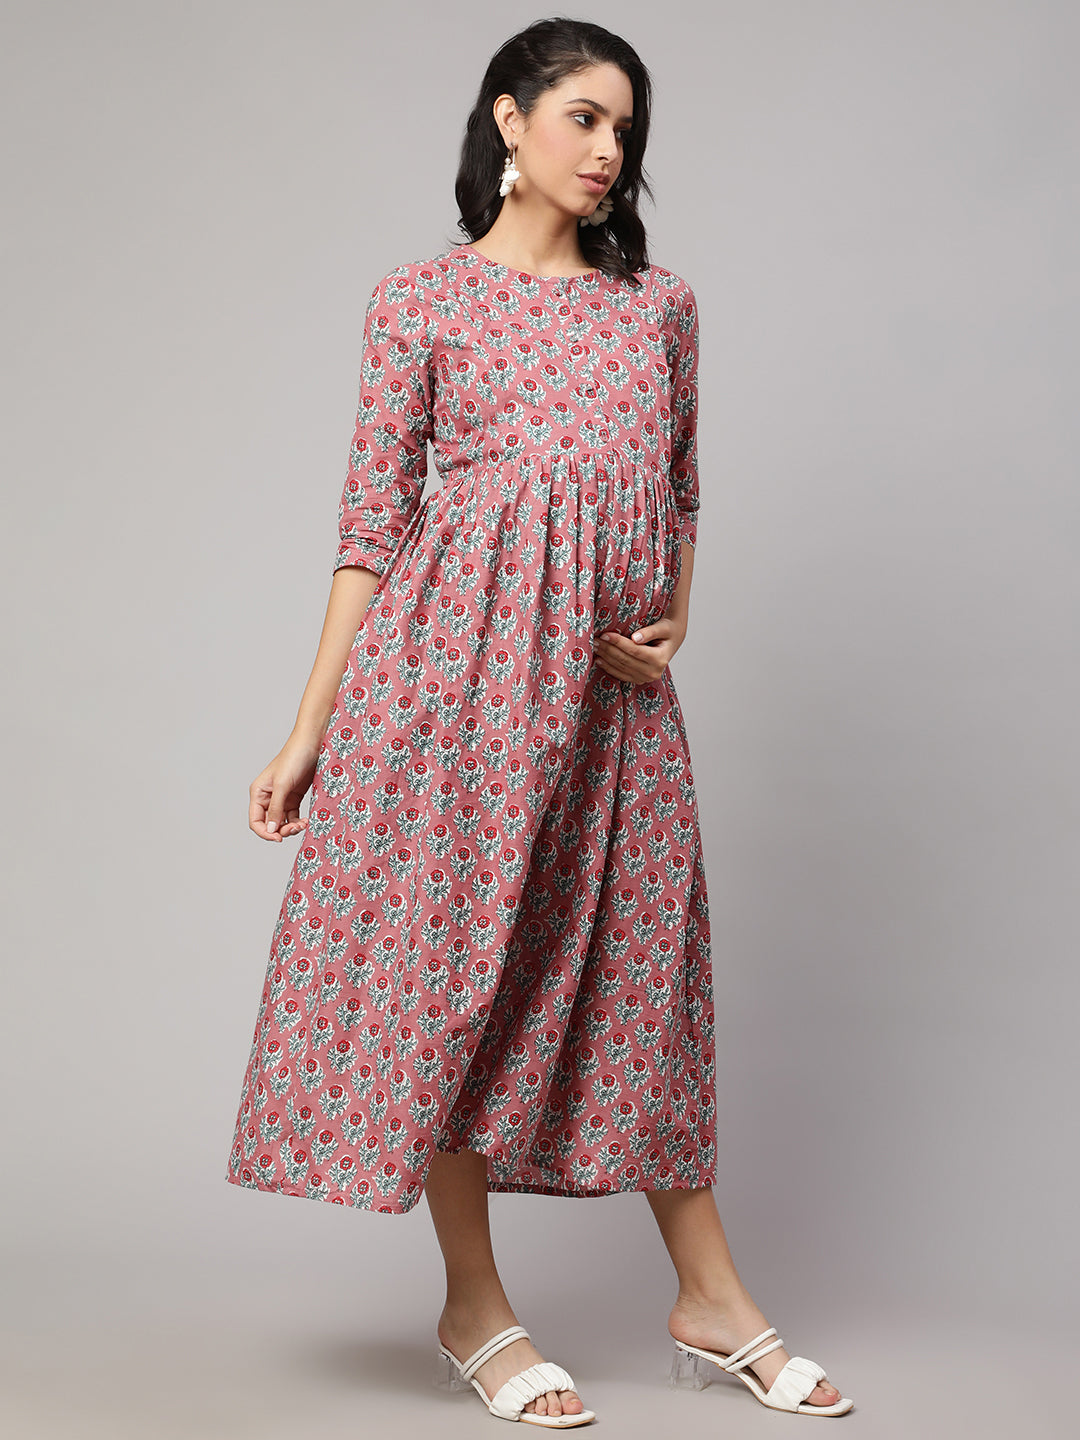 Women's Mauve Floral Printed Flared Maternity Dress - Nayo Clothing